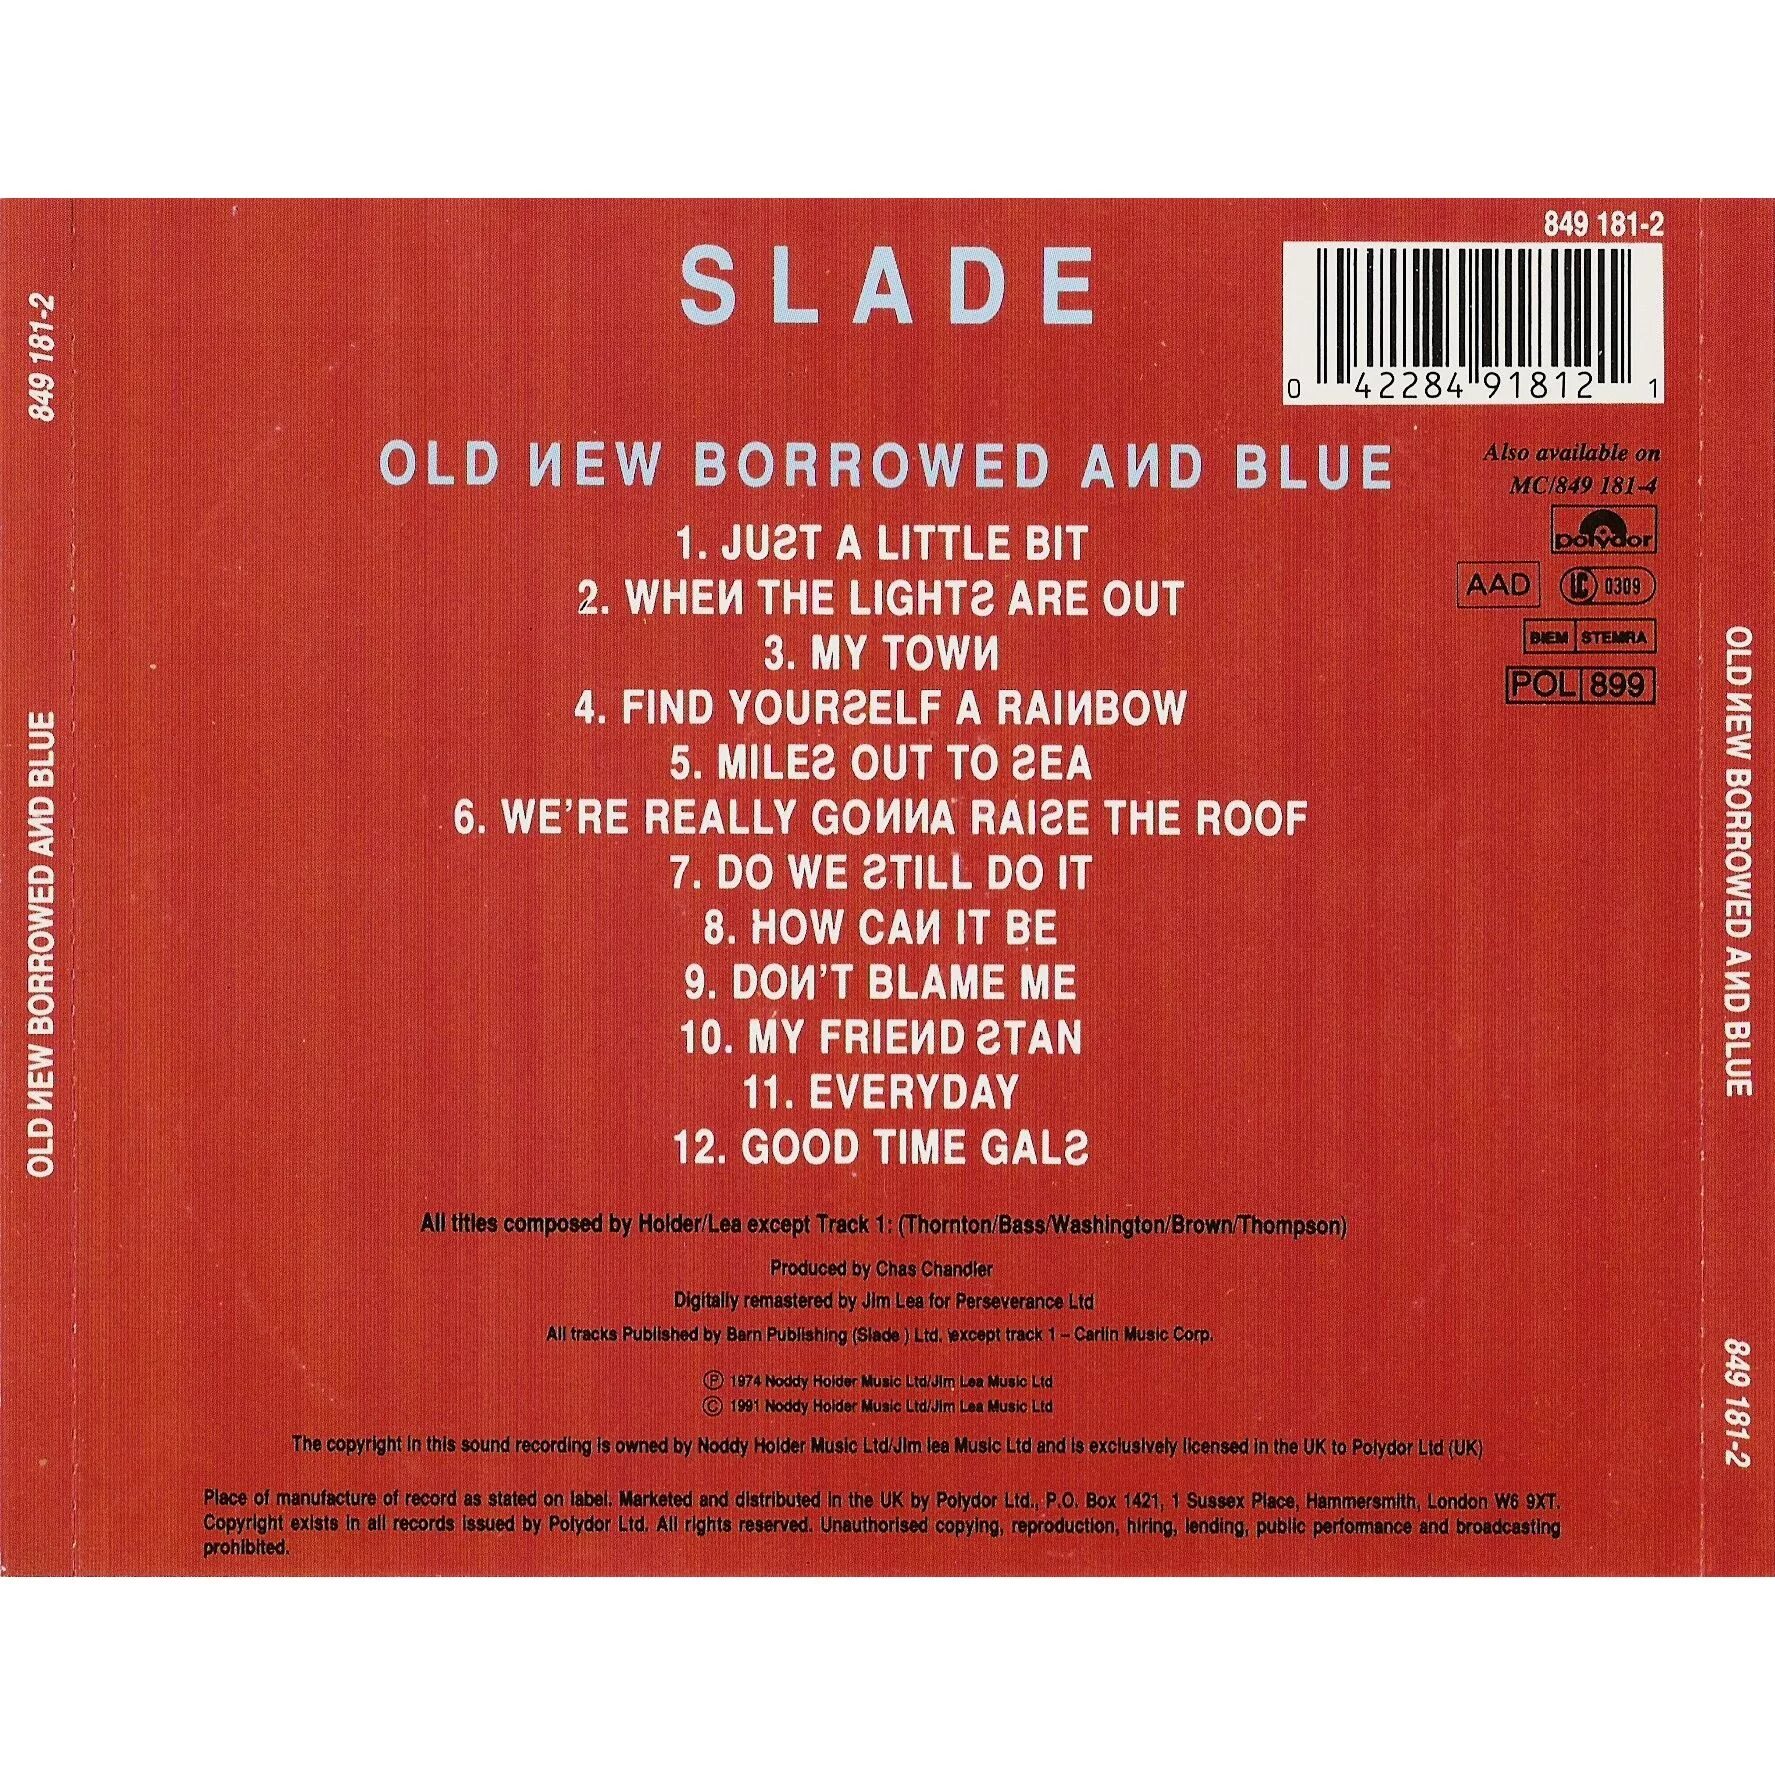 Old new borrowed. Old New Borrowed and Blue Slade. Slade 1974. Slade old New Borrowed and Blue обложка. Slade old New Borrowed and Blue LP.